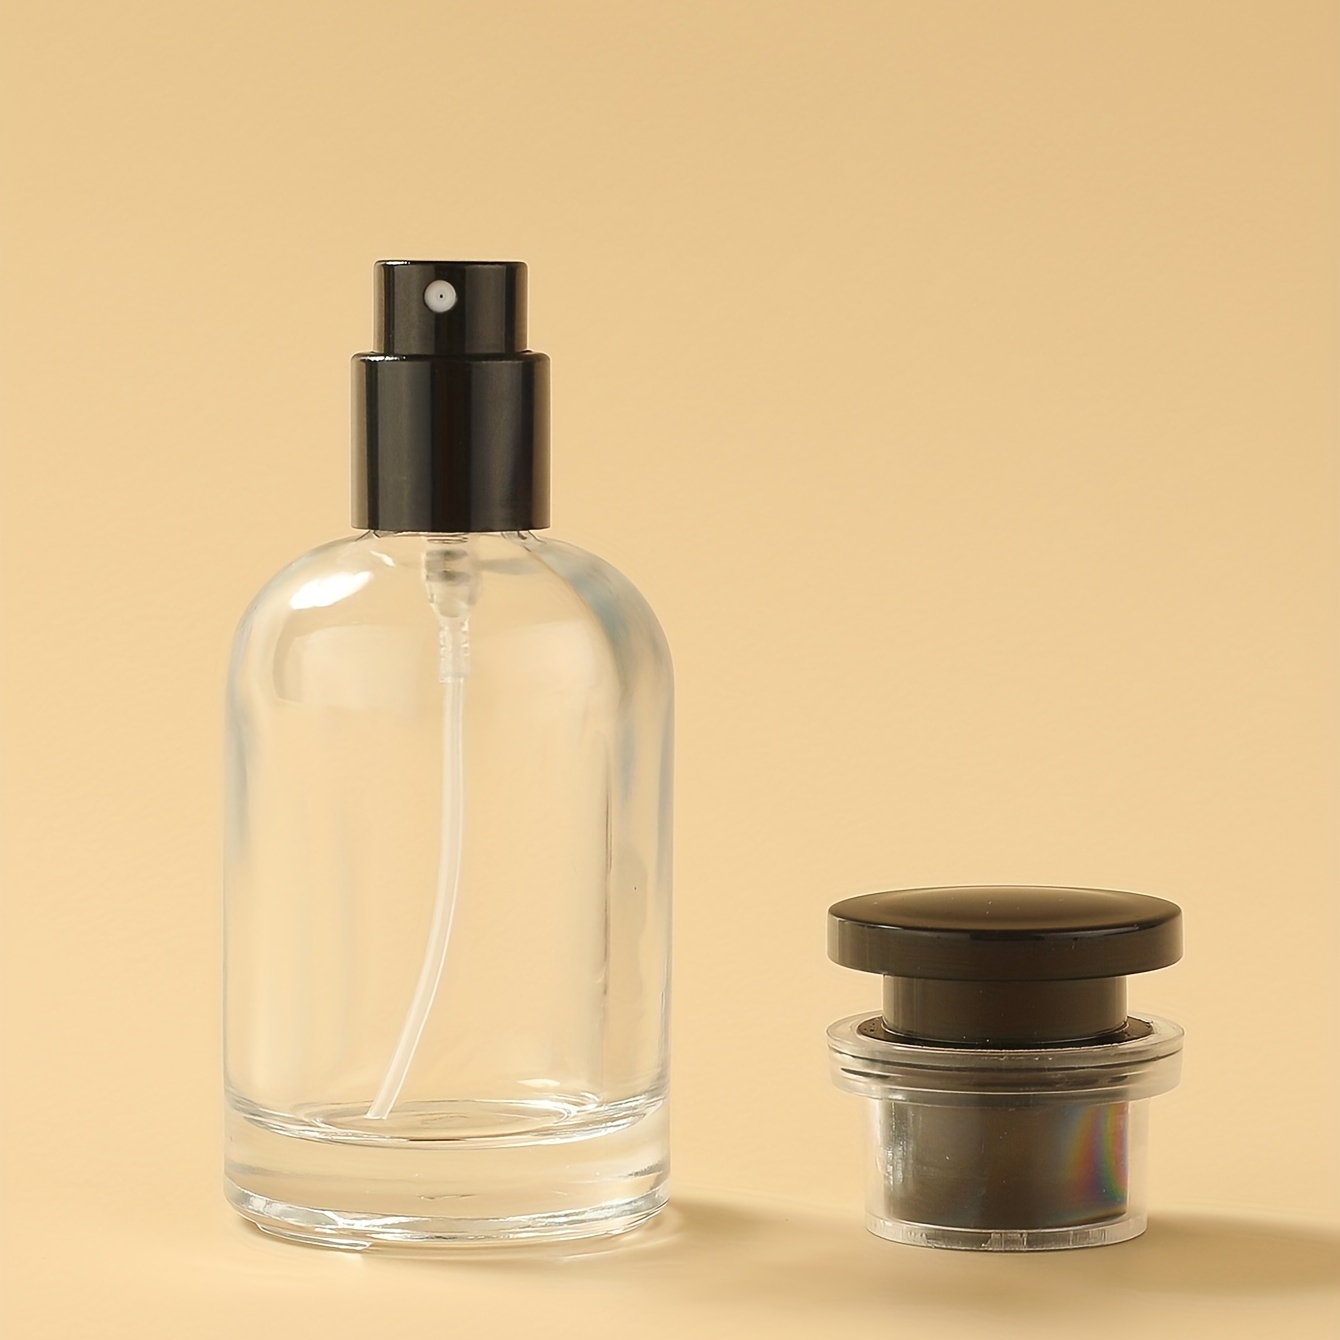 Atomizer Perfume Spray Bottle For Travel Clear Empty Cologne